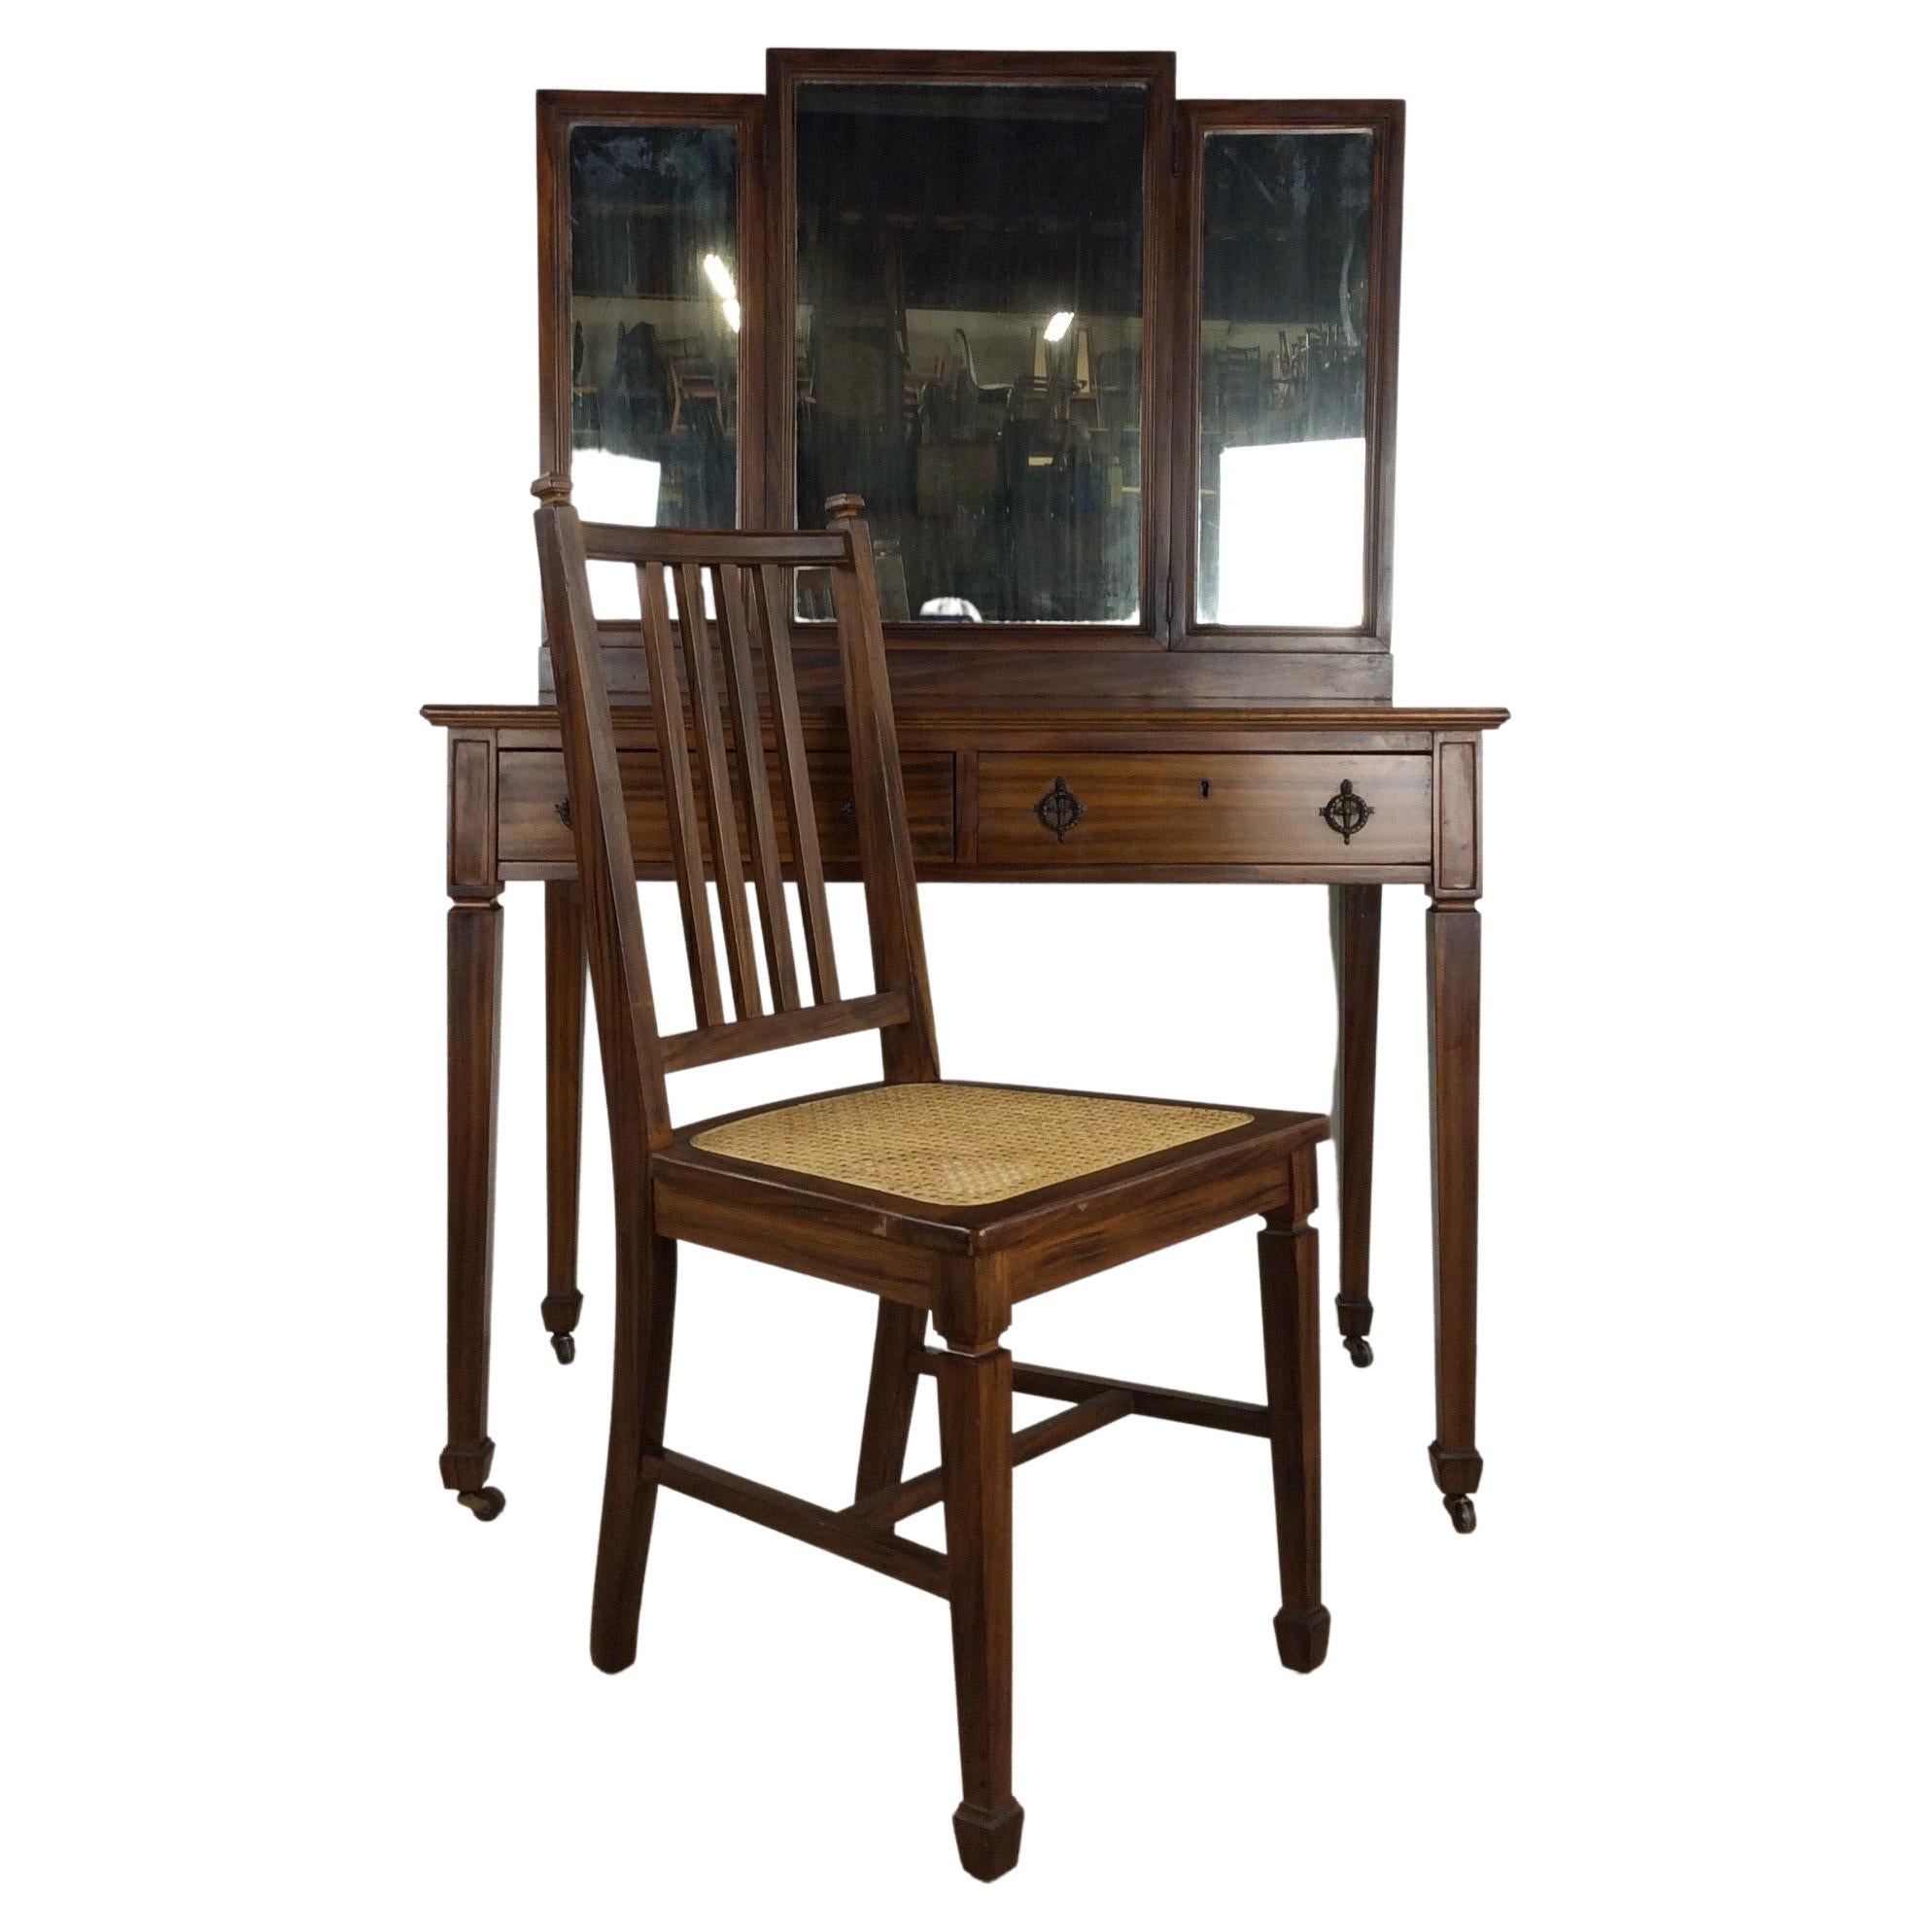 Antique Mahogany Mirrored Vanity with Caned Seat For Sale